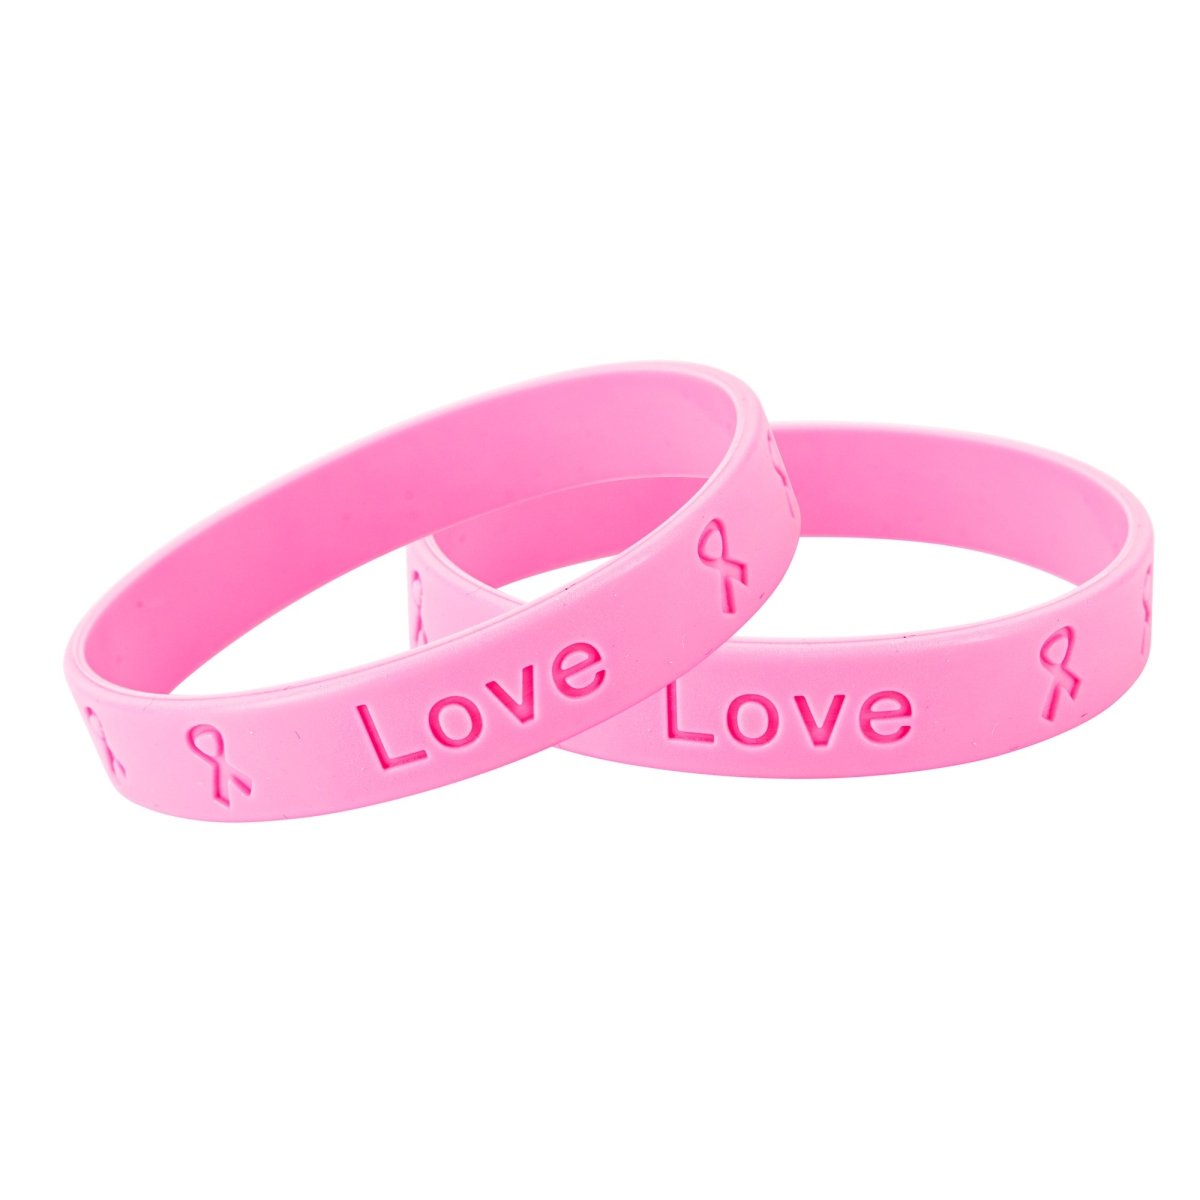 Survivors Sainstone 4-Pack Pink Awareness Ribbon Silicone Bracelets Cancer & Cause Rubber Wristbands Gift Unisex for Men Women for Patients Family and Friends